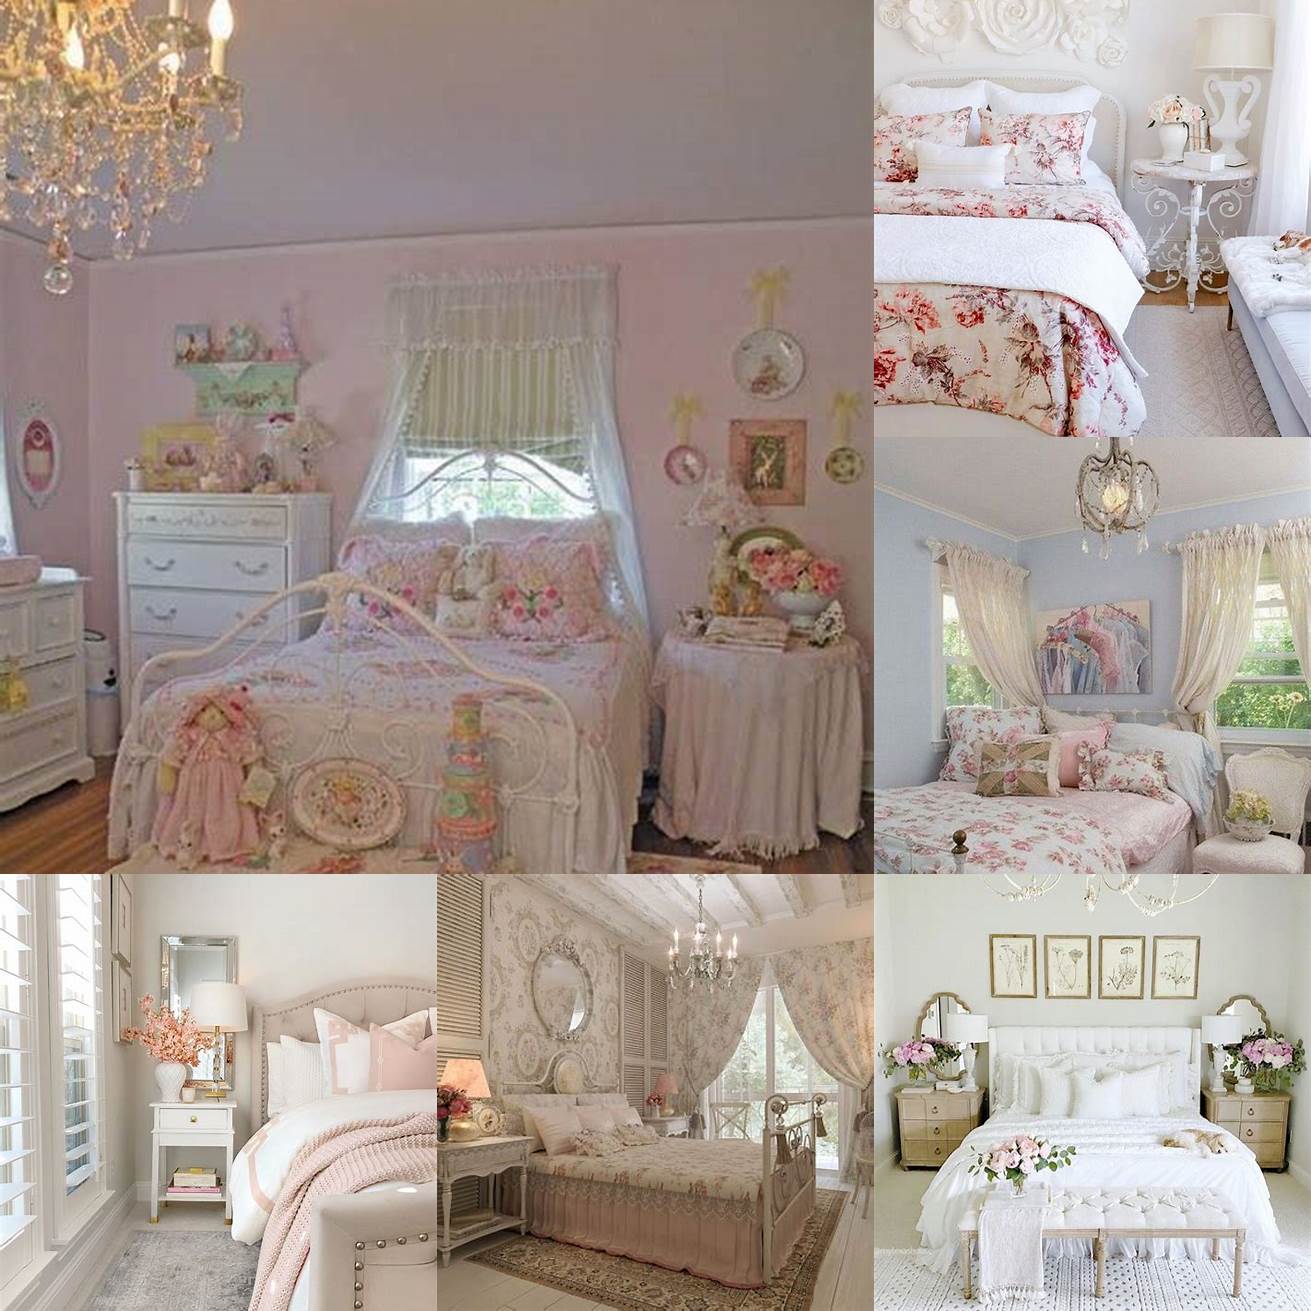 Antique mirrors and soft pastel colors create a romantic and feminine atmosphere in this Shabby Chic bedroom